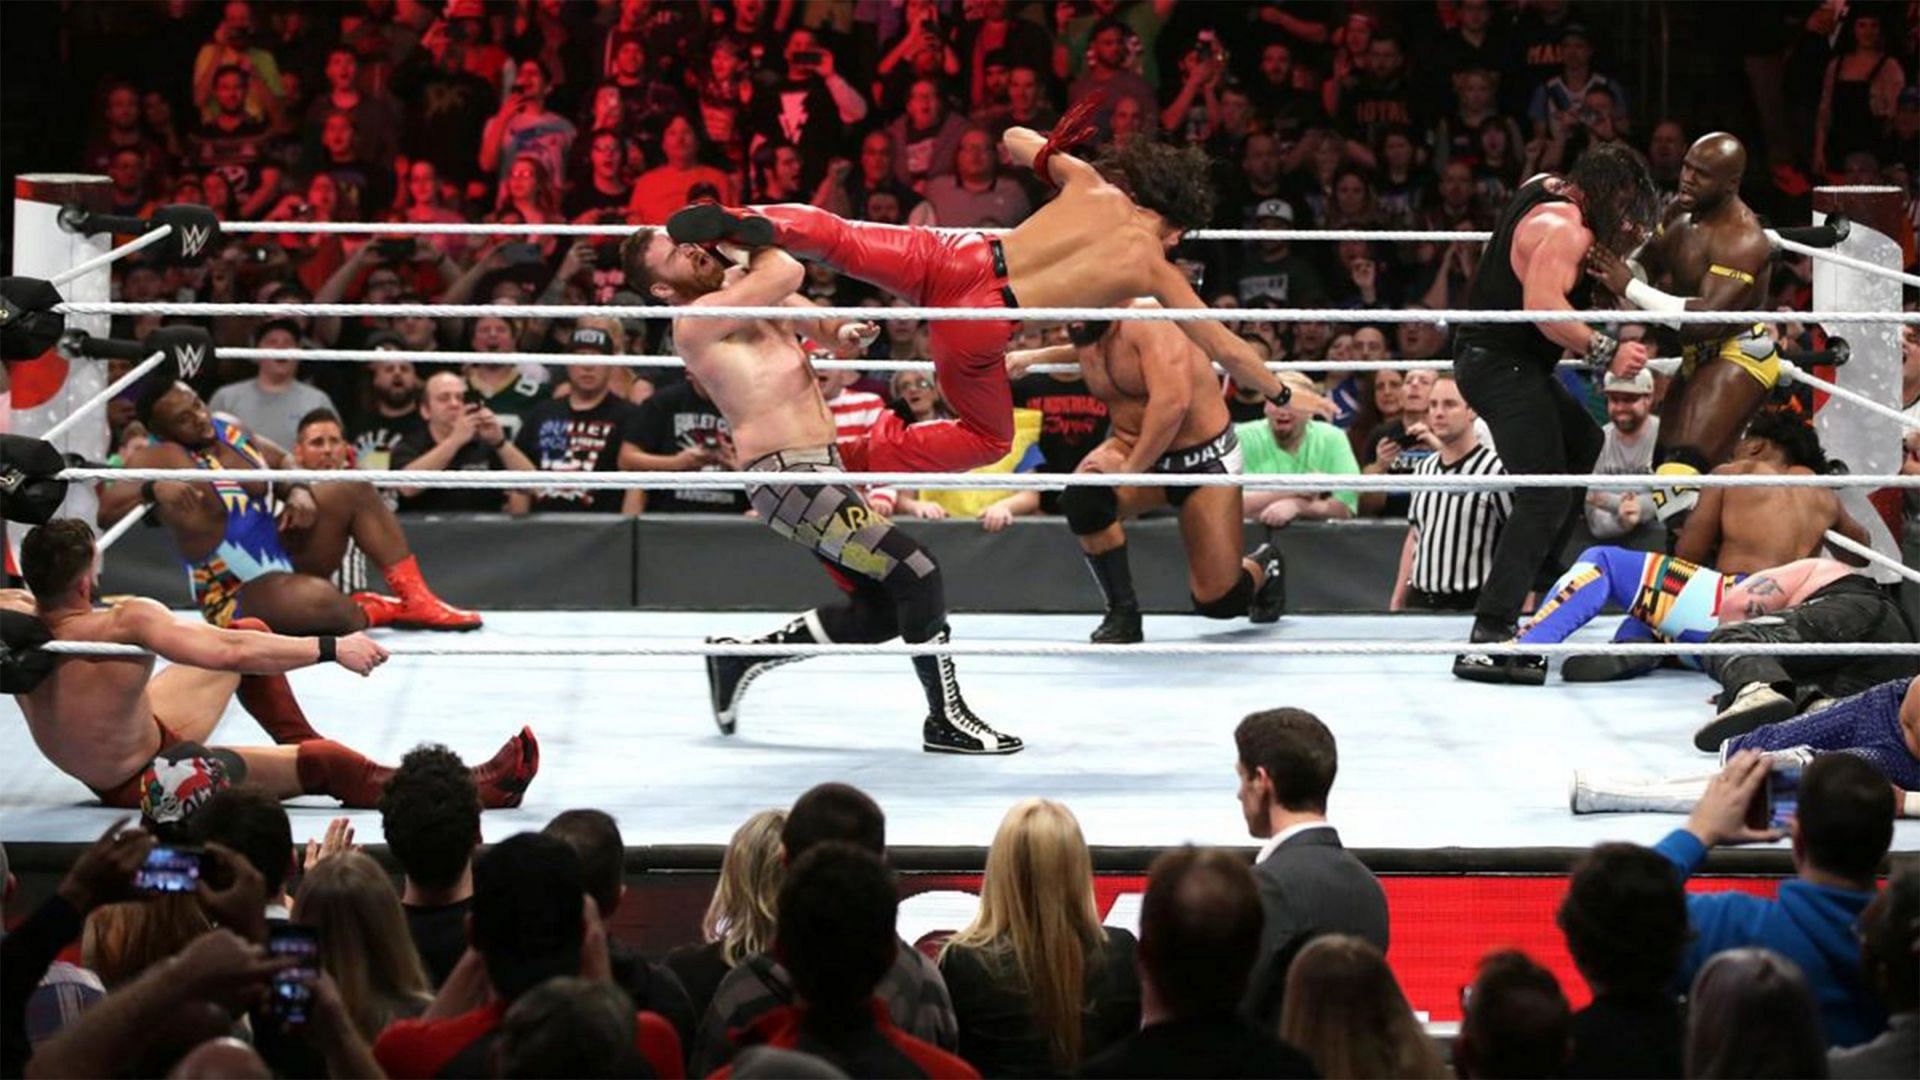 The Royal Rumble match is returning in January 2023